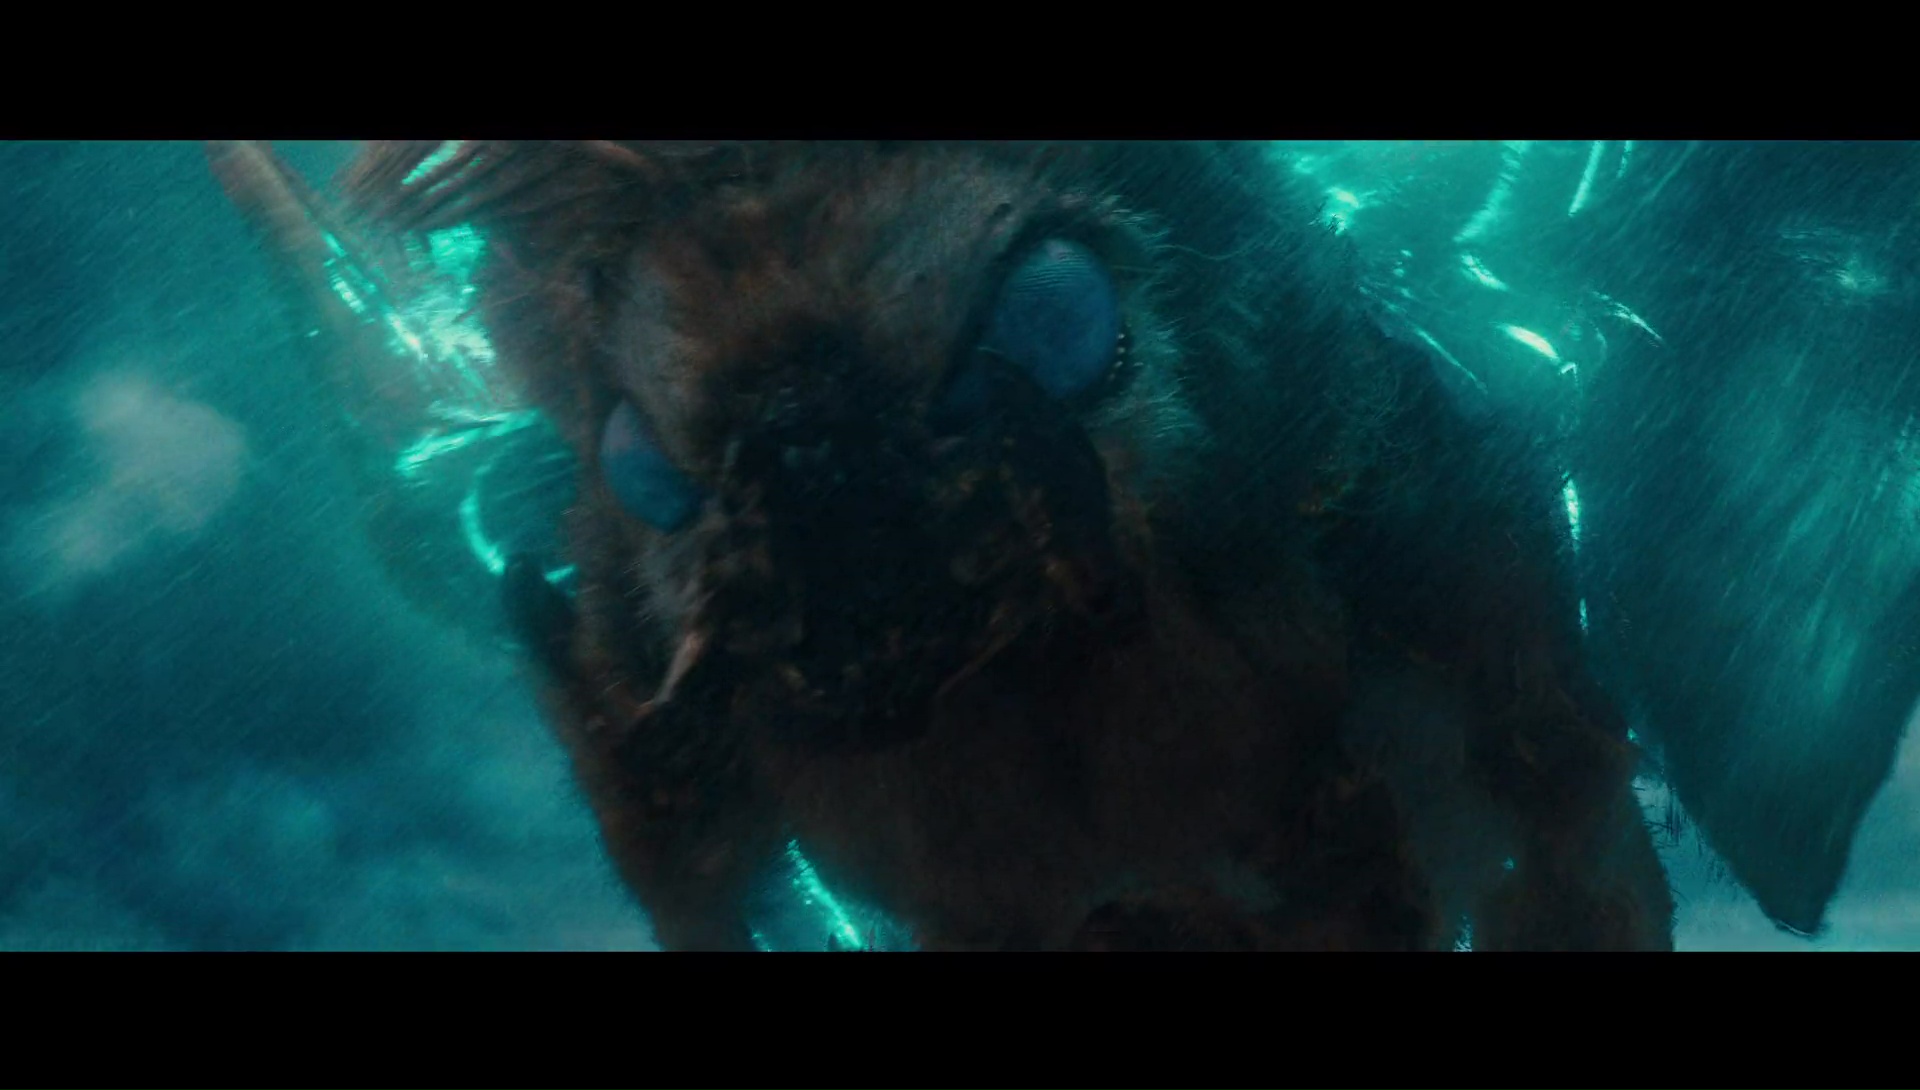 Godzilla King Of The Monsters Trailer 2 Screenshots Godzilla King Of The Monsters Trailer 0442